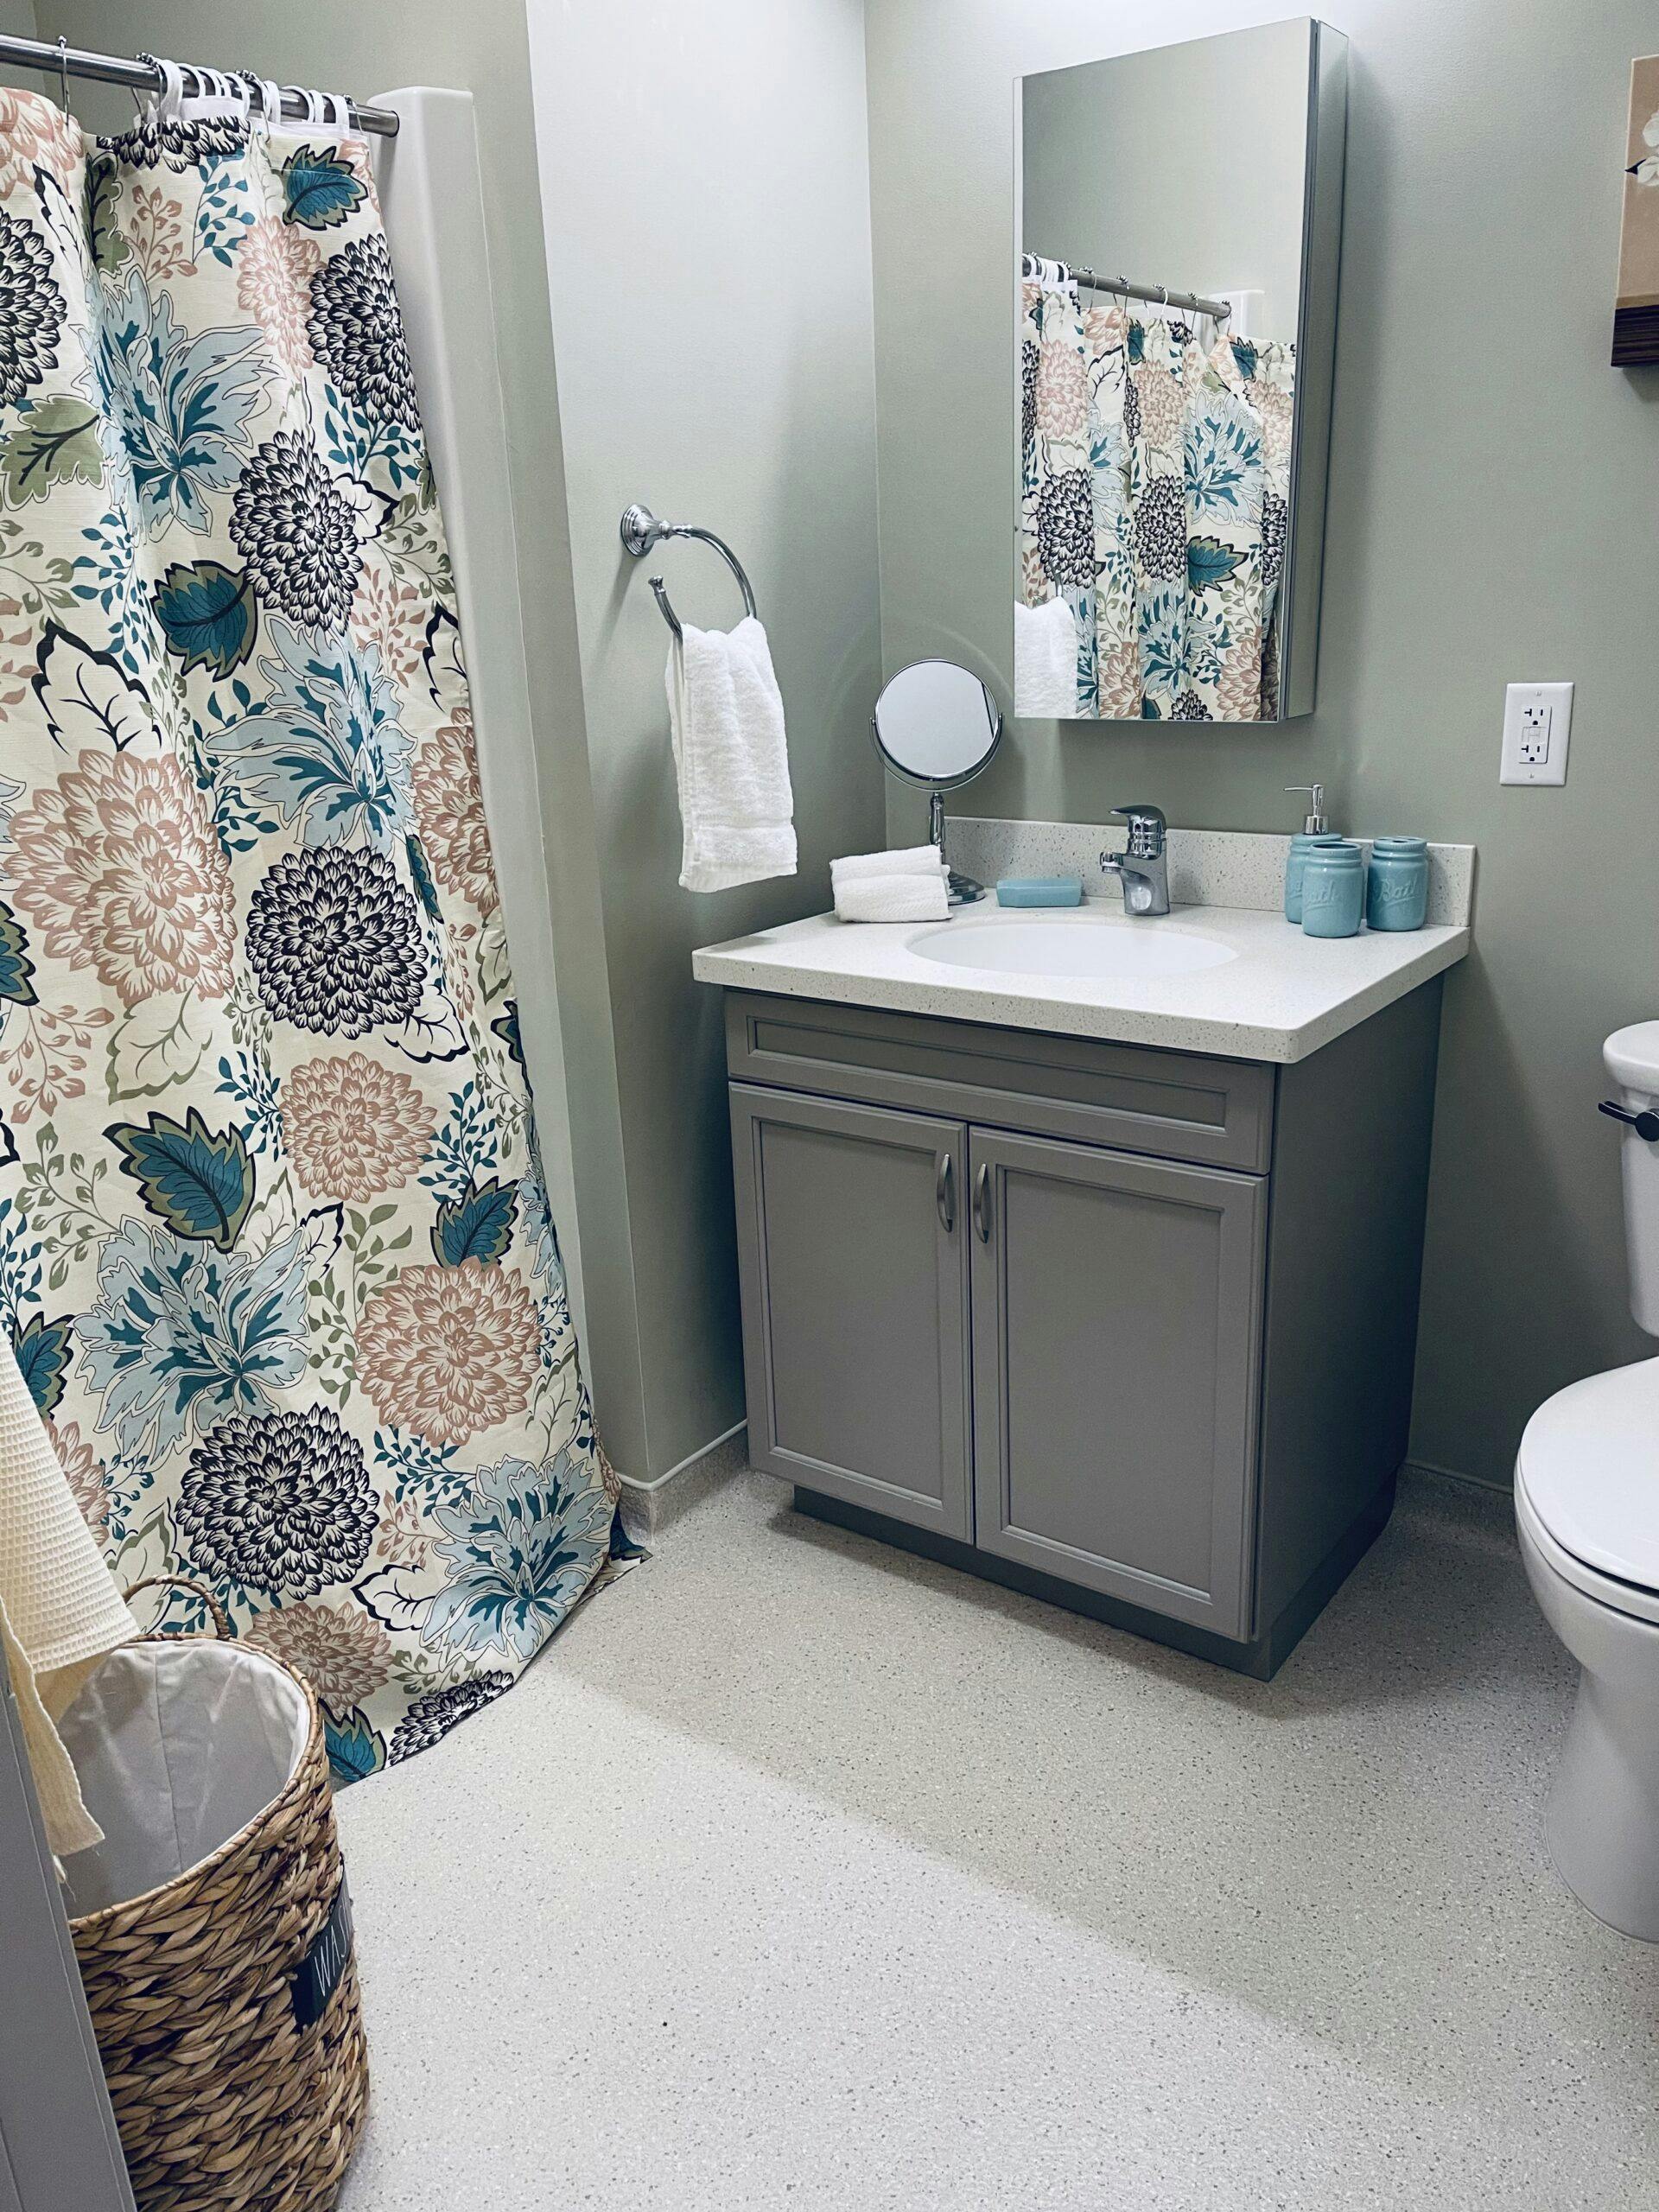 An assisted living bathroom with a sink, toilet, and shower curtain.